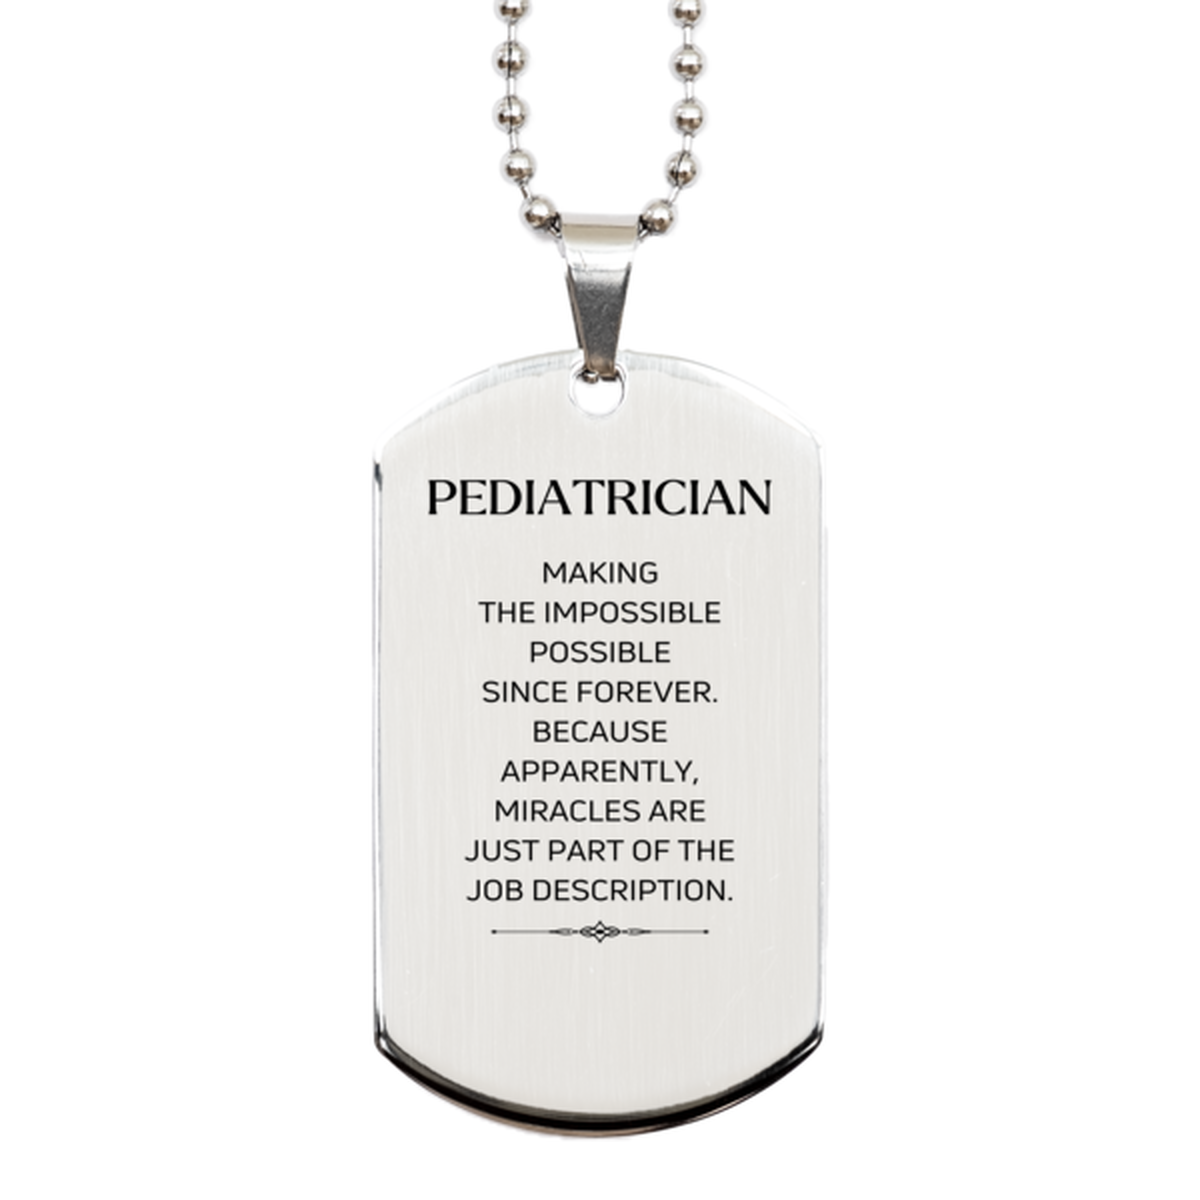 Funny Pediatrician Gifts, Miracles are just part of the job description, Inspirational Birthday Silver Dog Tag For Pediatrician, Men, Women, Coworkers, Friends, Boss